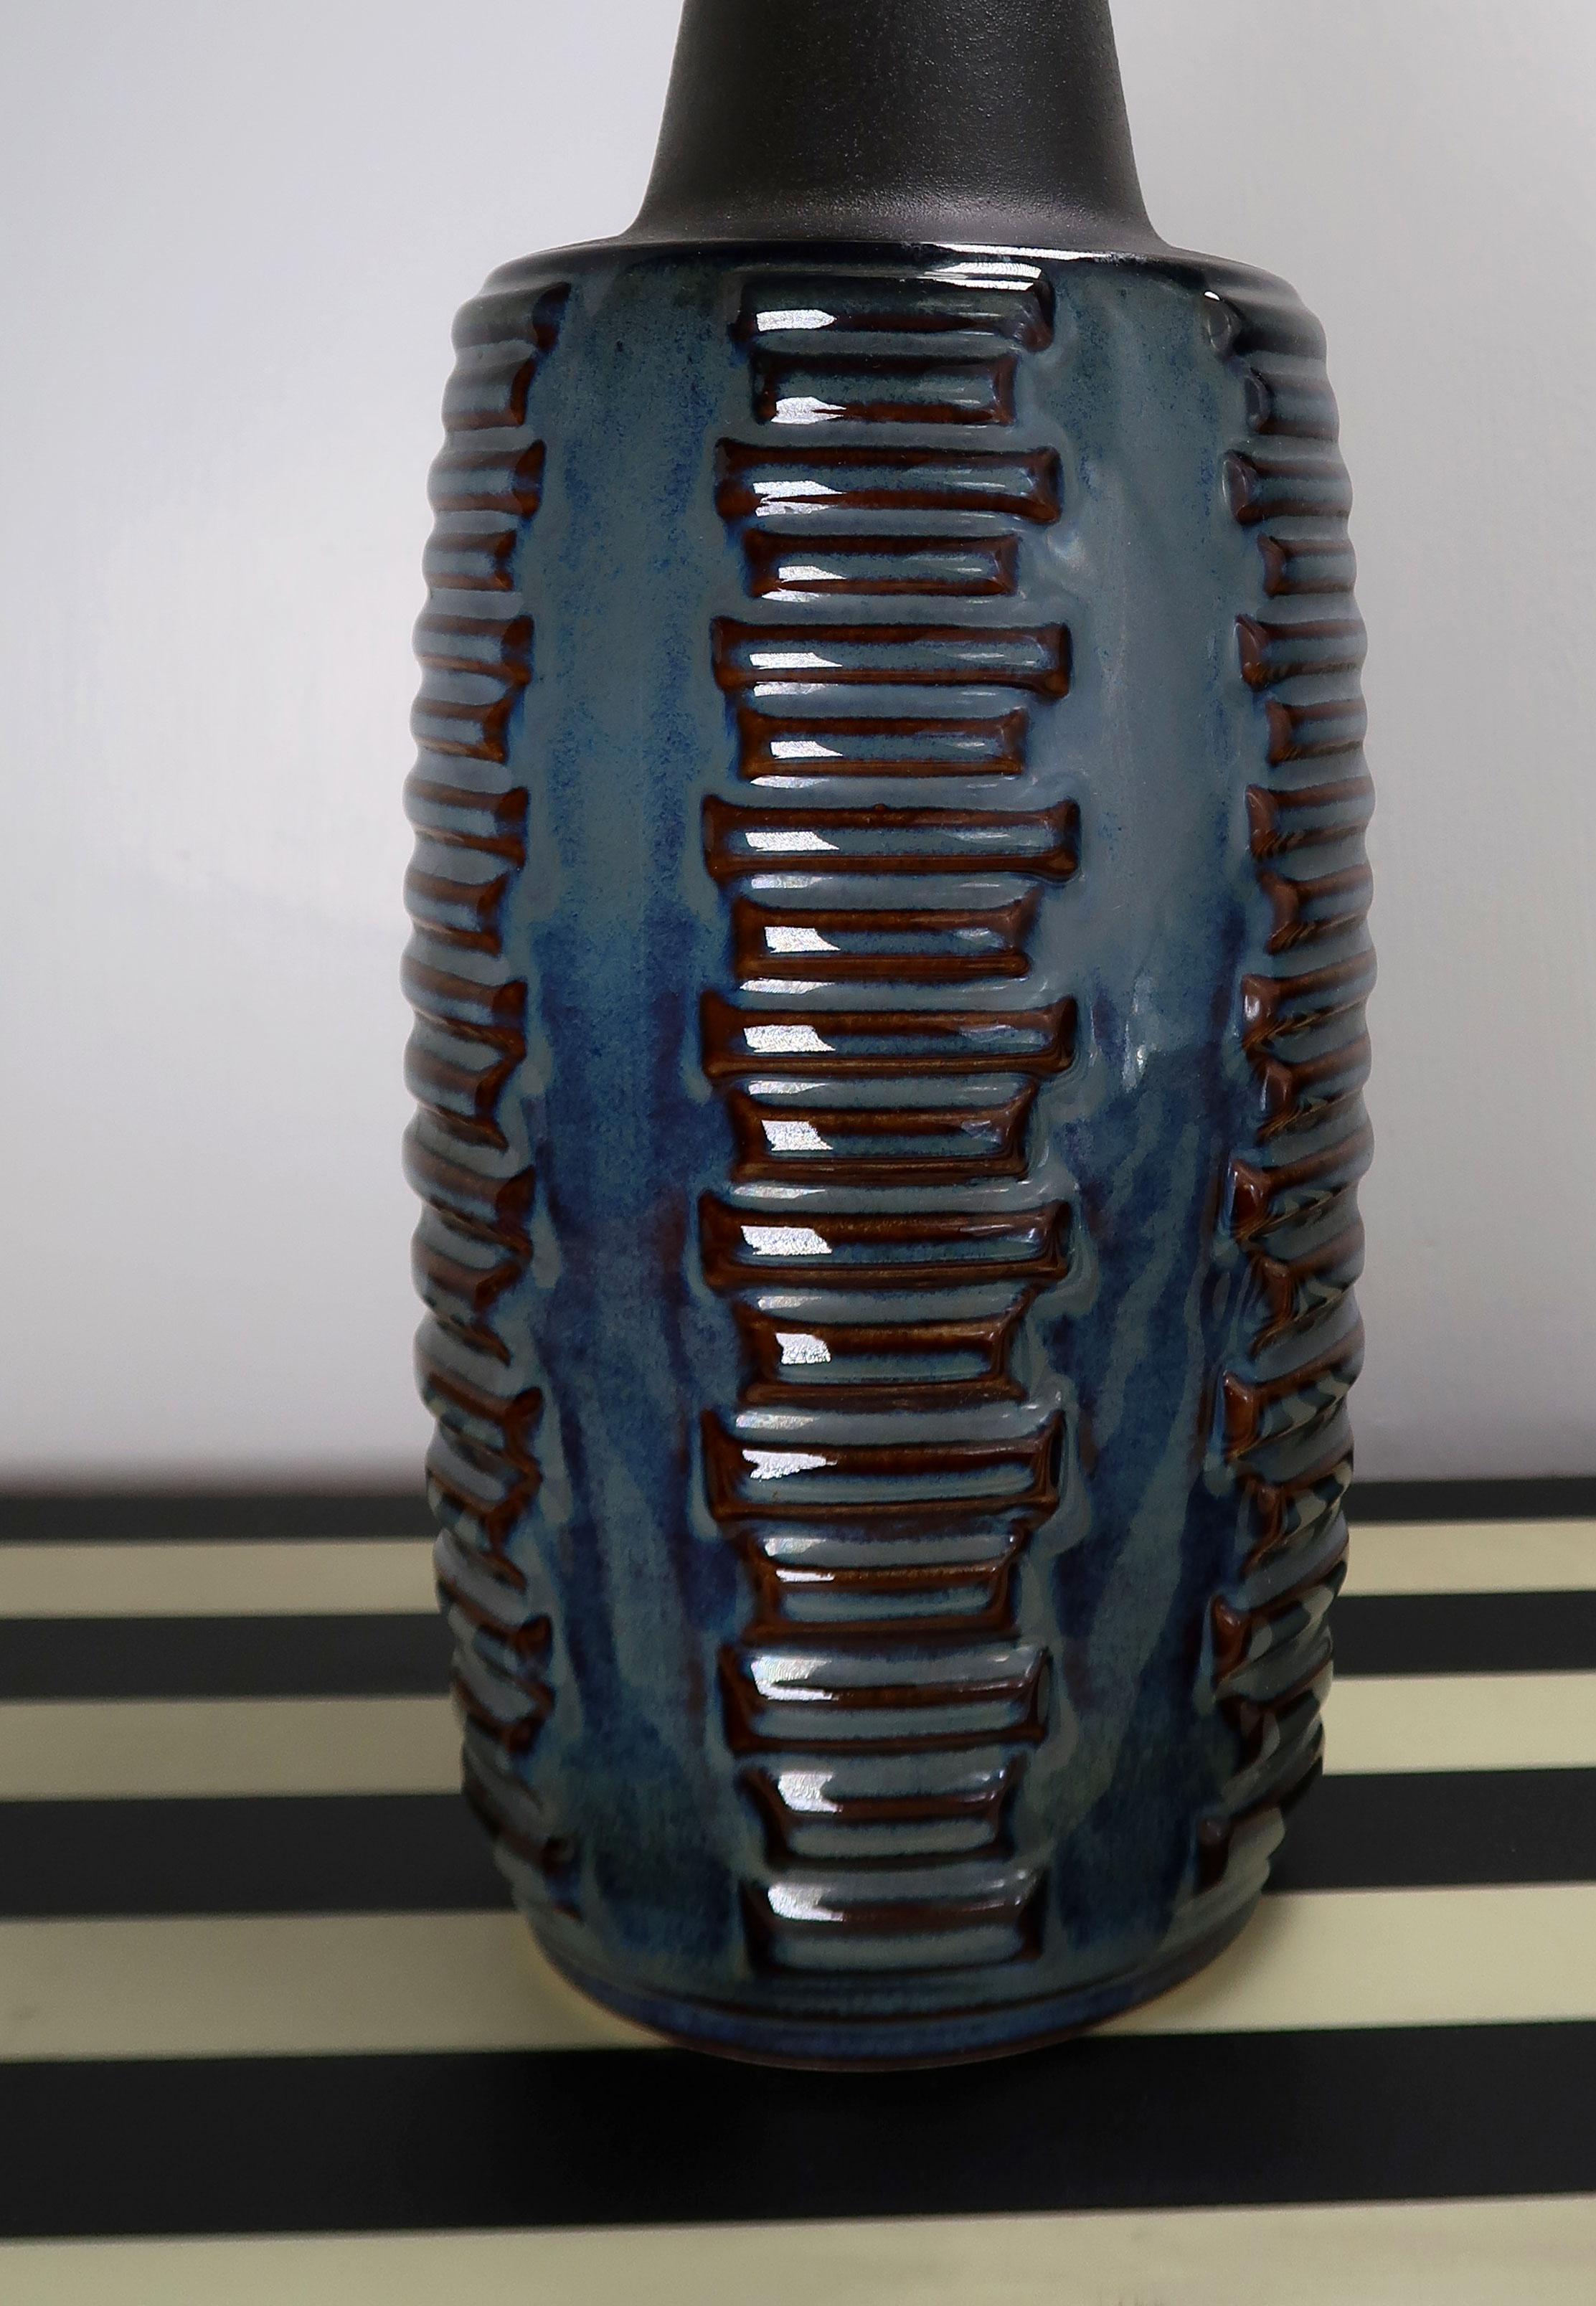 Hand-Painted Shiny Blue Black Danish Modern Stoneware Table Lamp, Søholm, 1960s For Sale